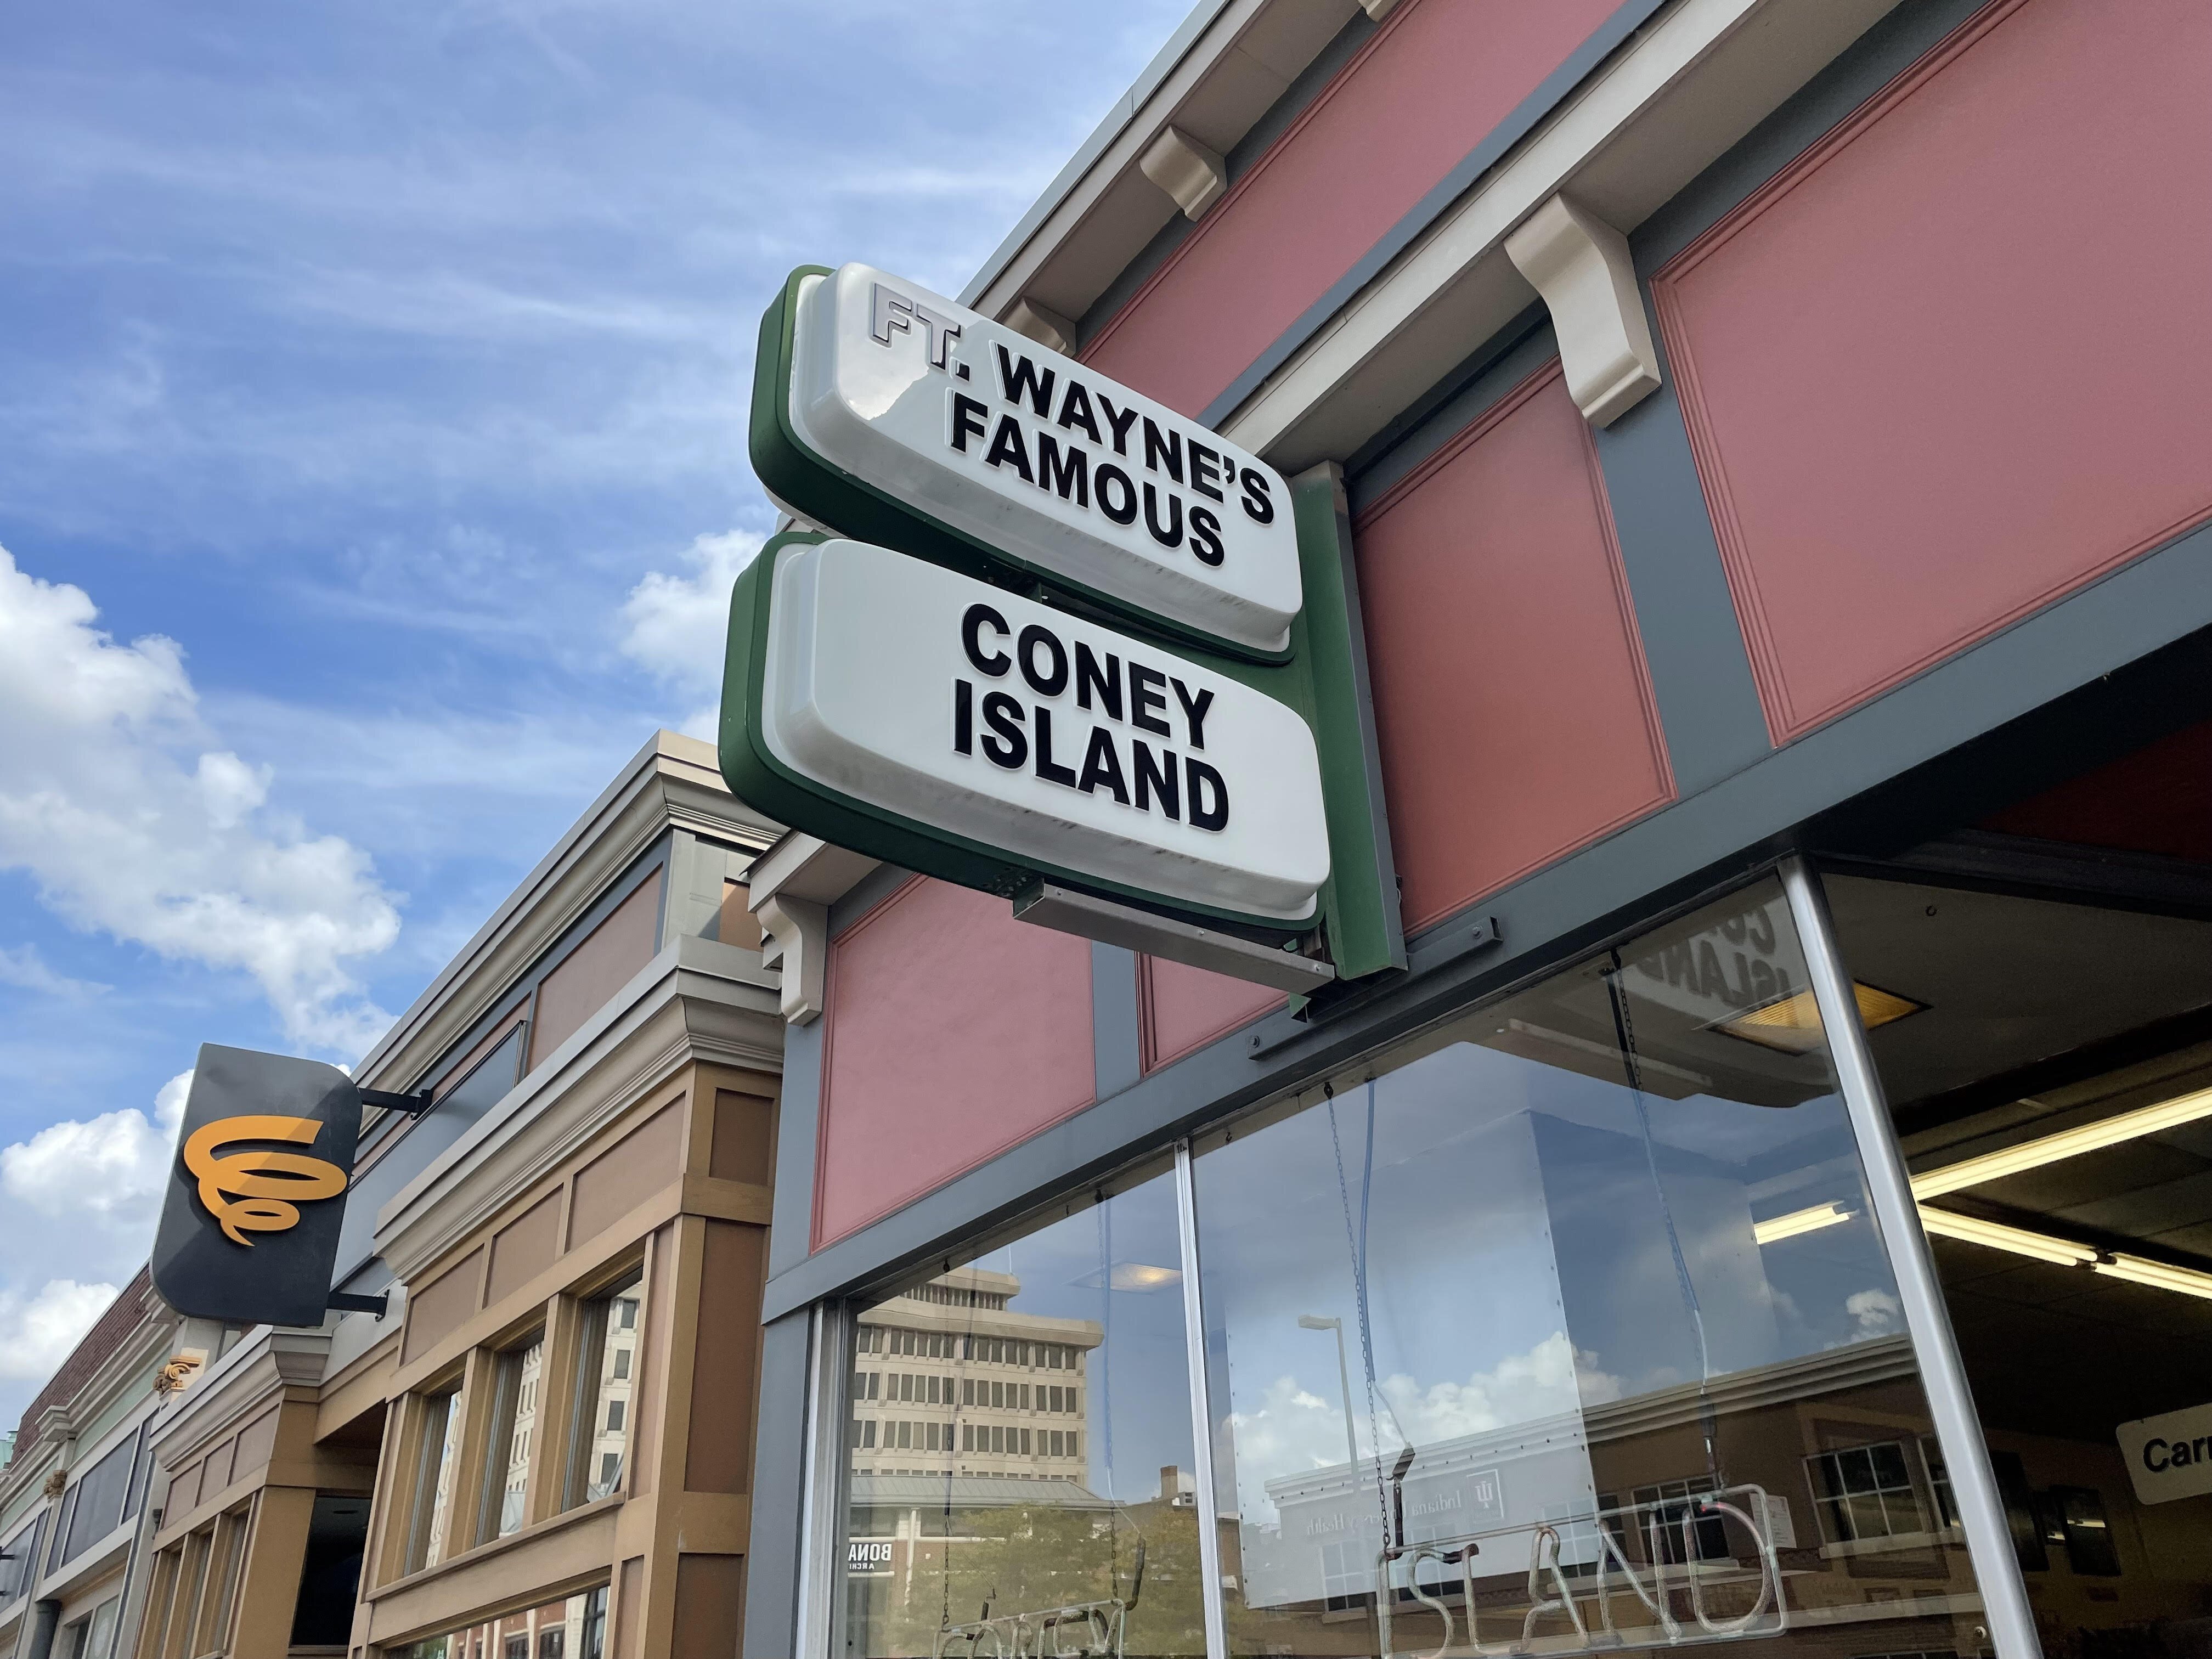 There's an Easter egg inside Fort Wayne's Famous Coney Island.